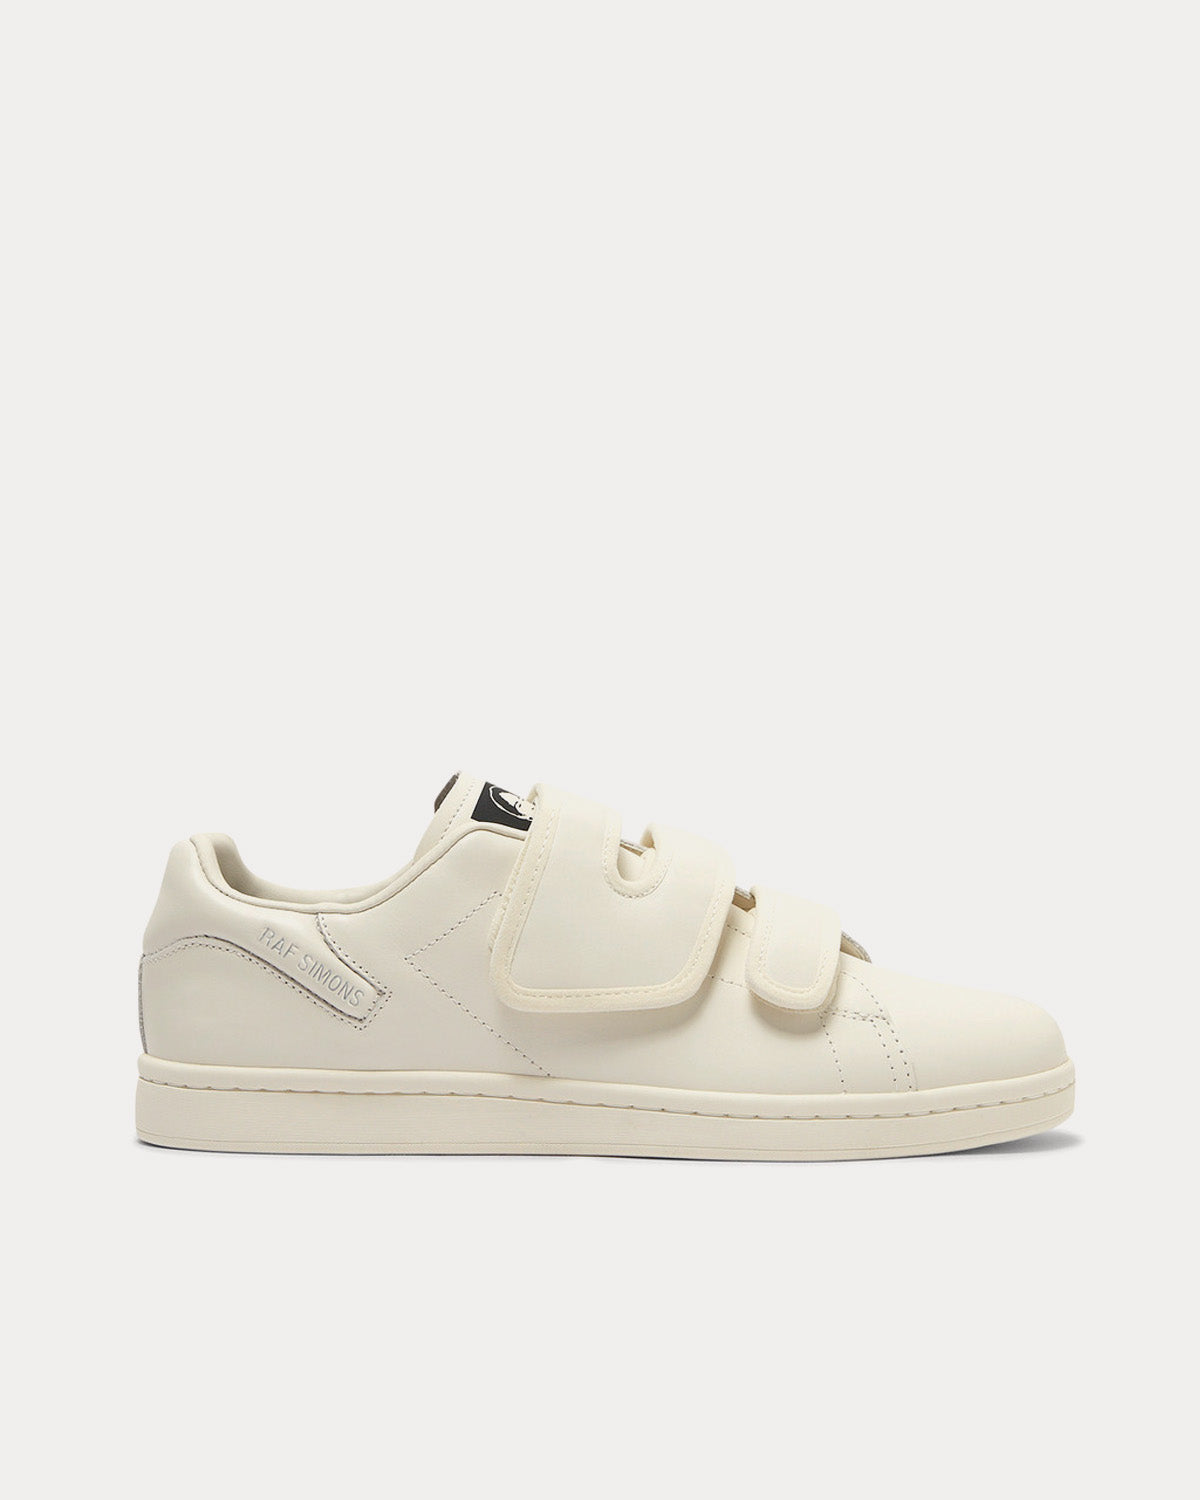 Orion Redux Off-White Low Top Sneakers